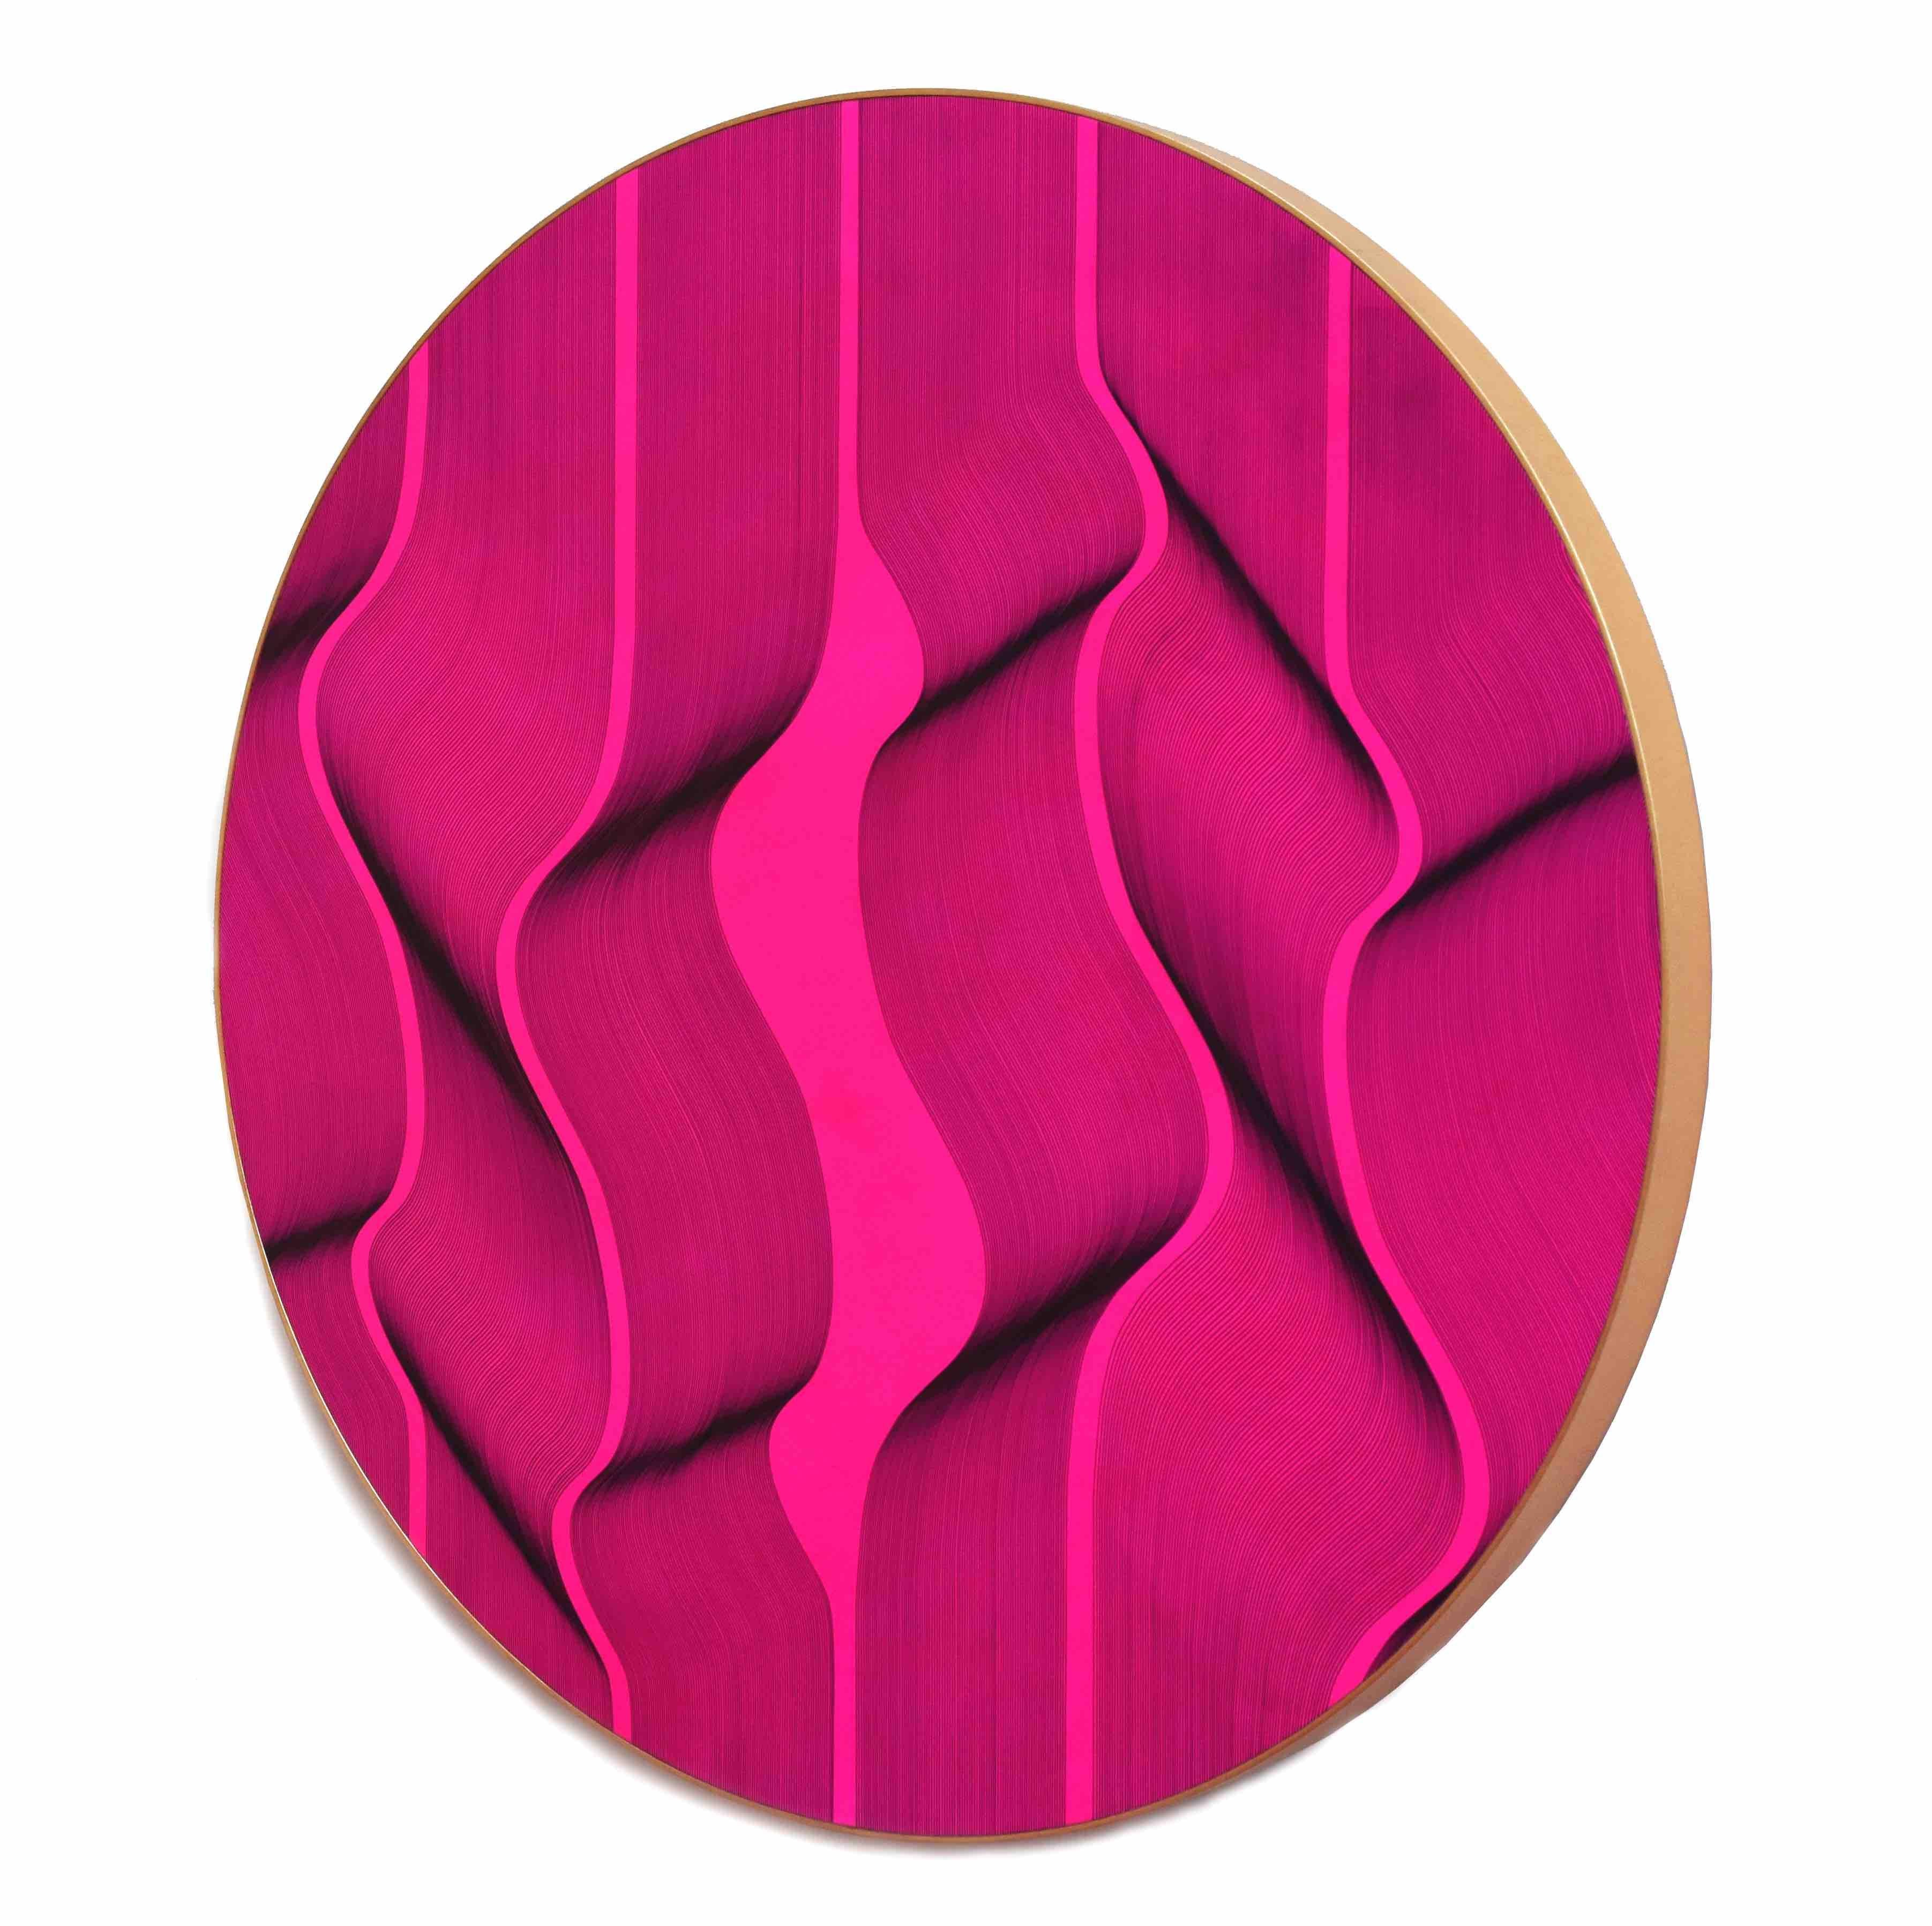 Fluo pink surface - geometric abstract painting - Abstract Geometric Painting by Roberto Lucchetta